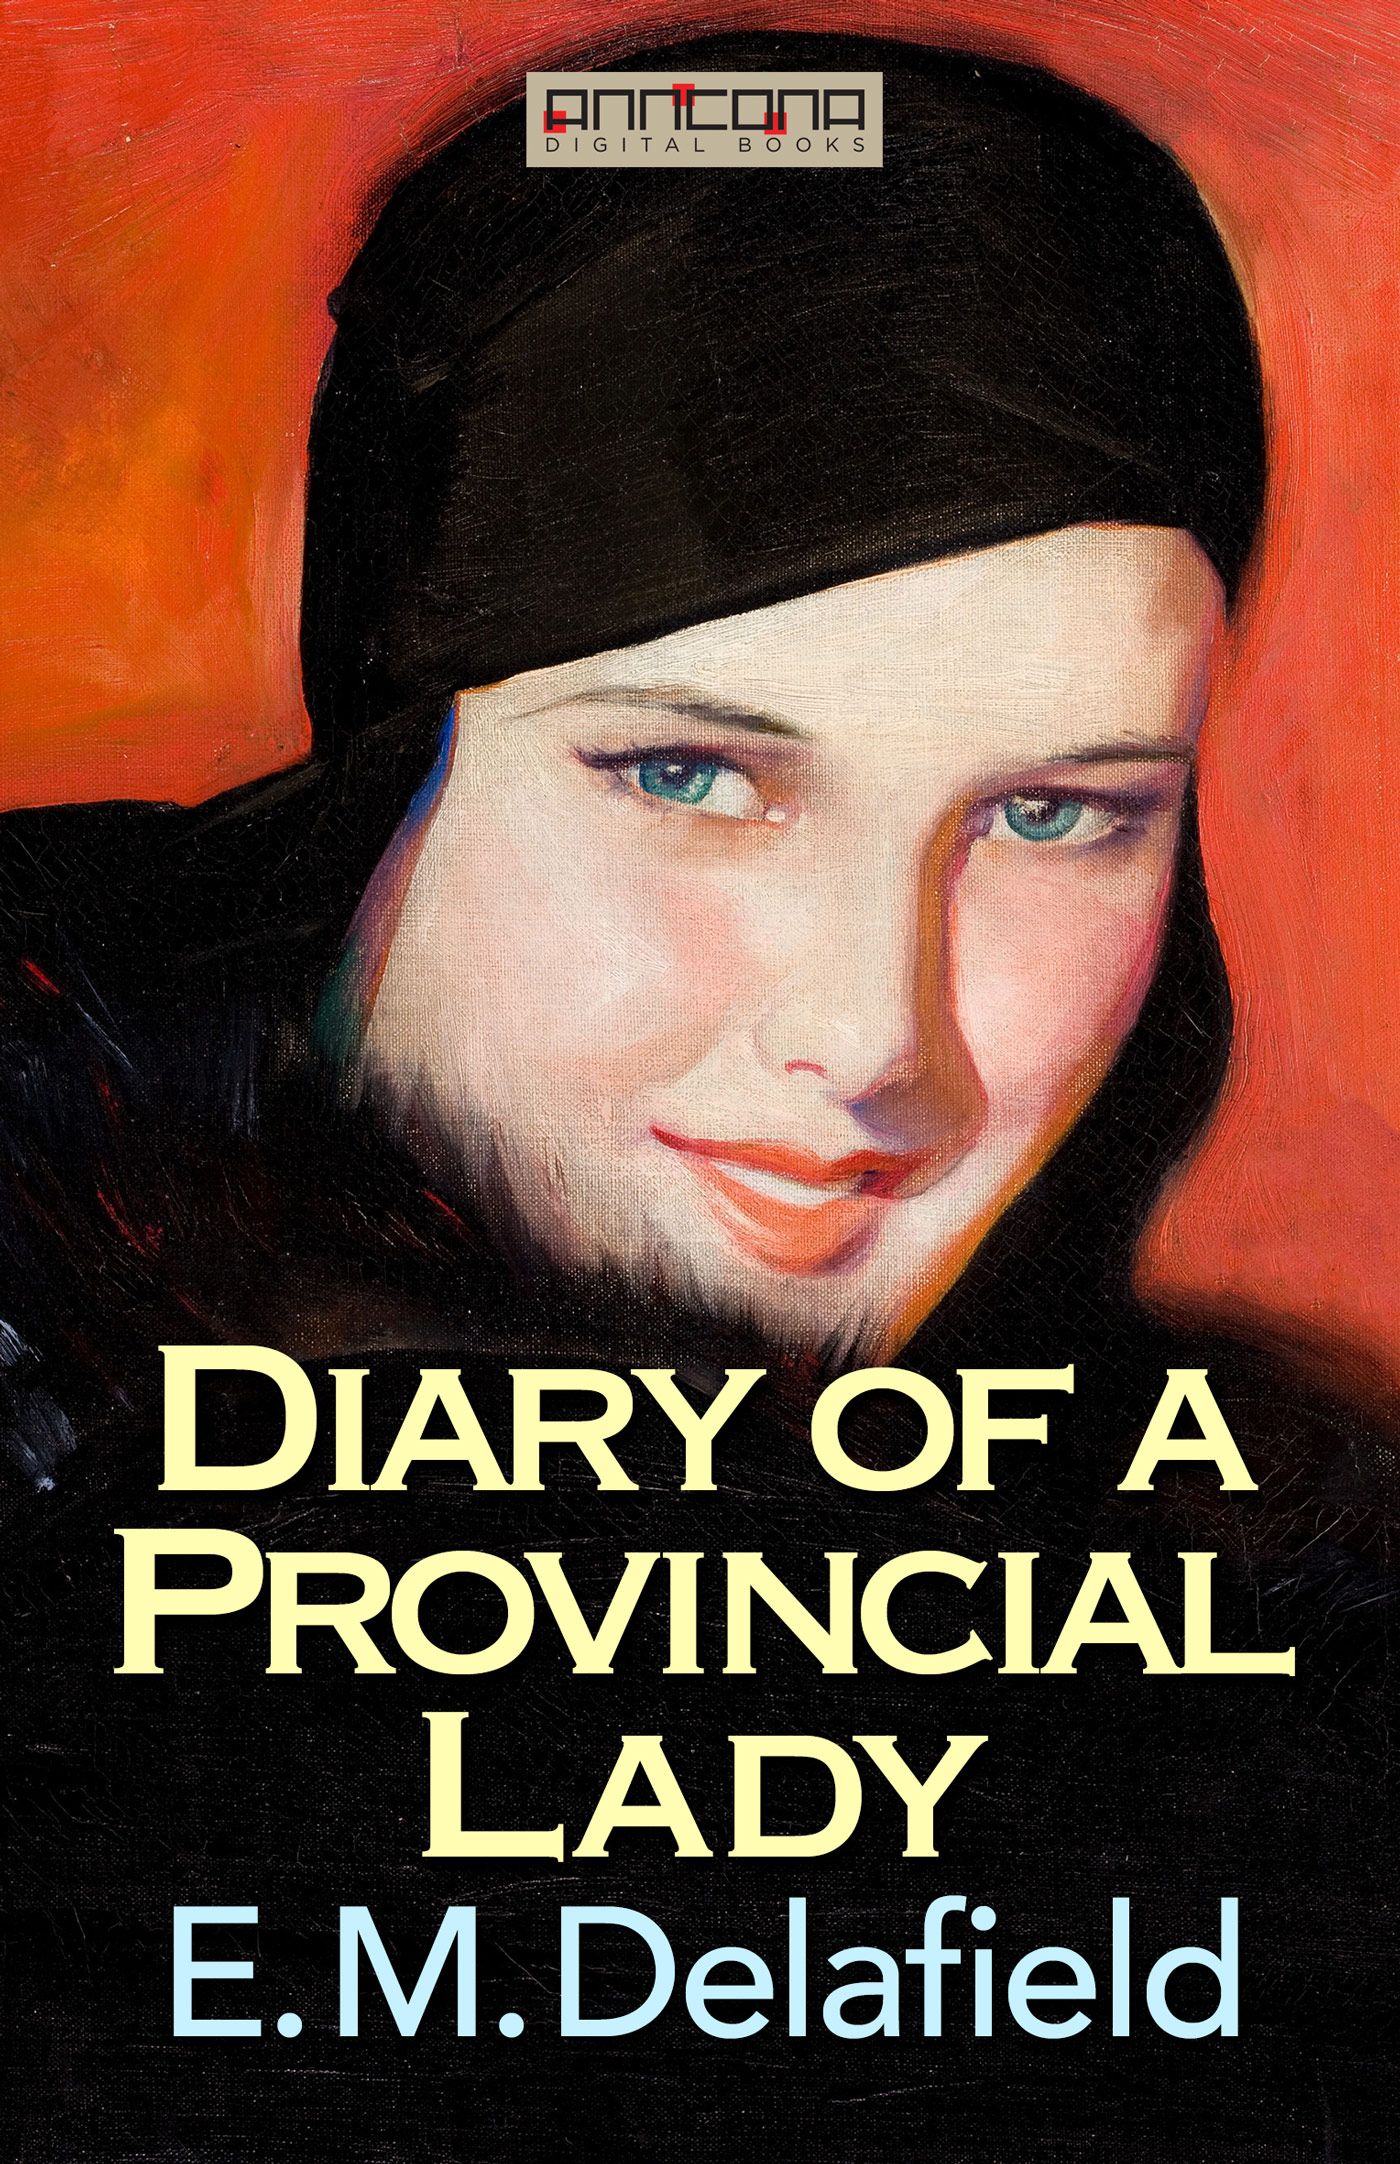 Diary of a Provincial Lady, eBook by E. M. Delafield